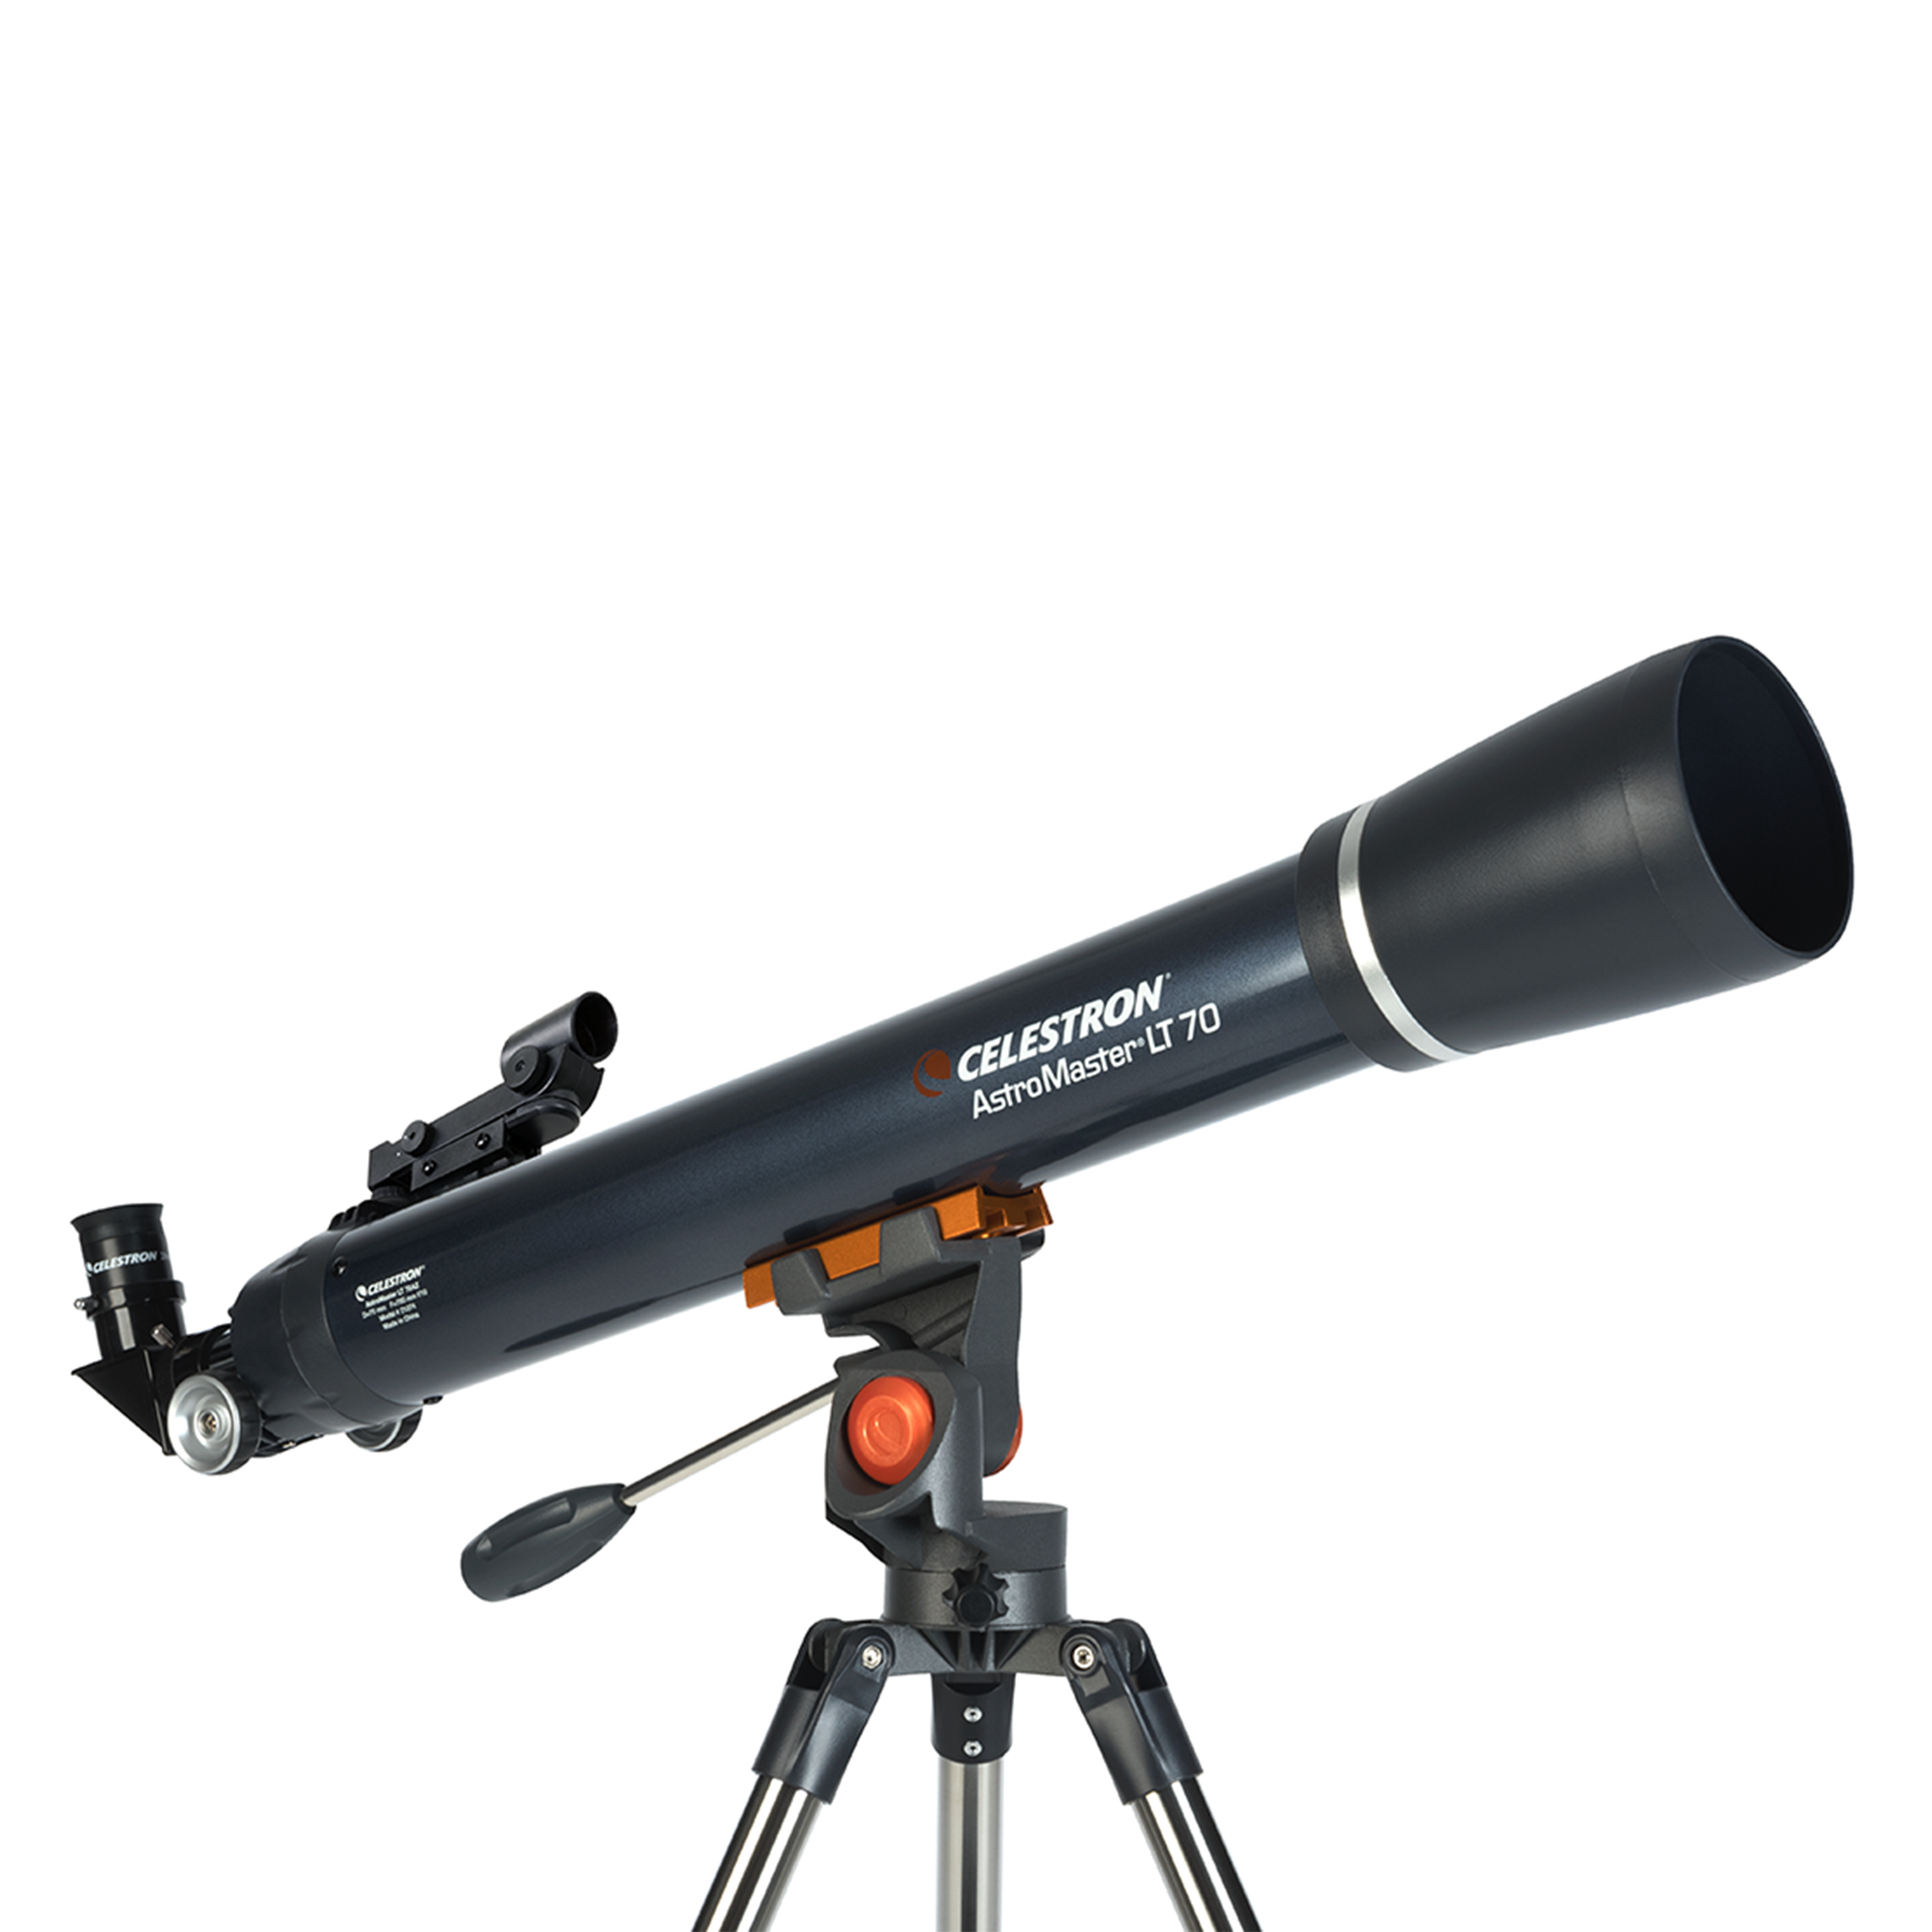 Celestron AstroMaster 70AZ LT Refractor Telescope Kit with Smartphone Adapter and Bluetooth Remote, Ideal Telescope for Beginners, Capture Your Own Images, Tripod plus Bonus Accessories Included - image 2 of 8